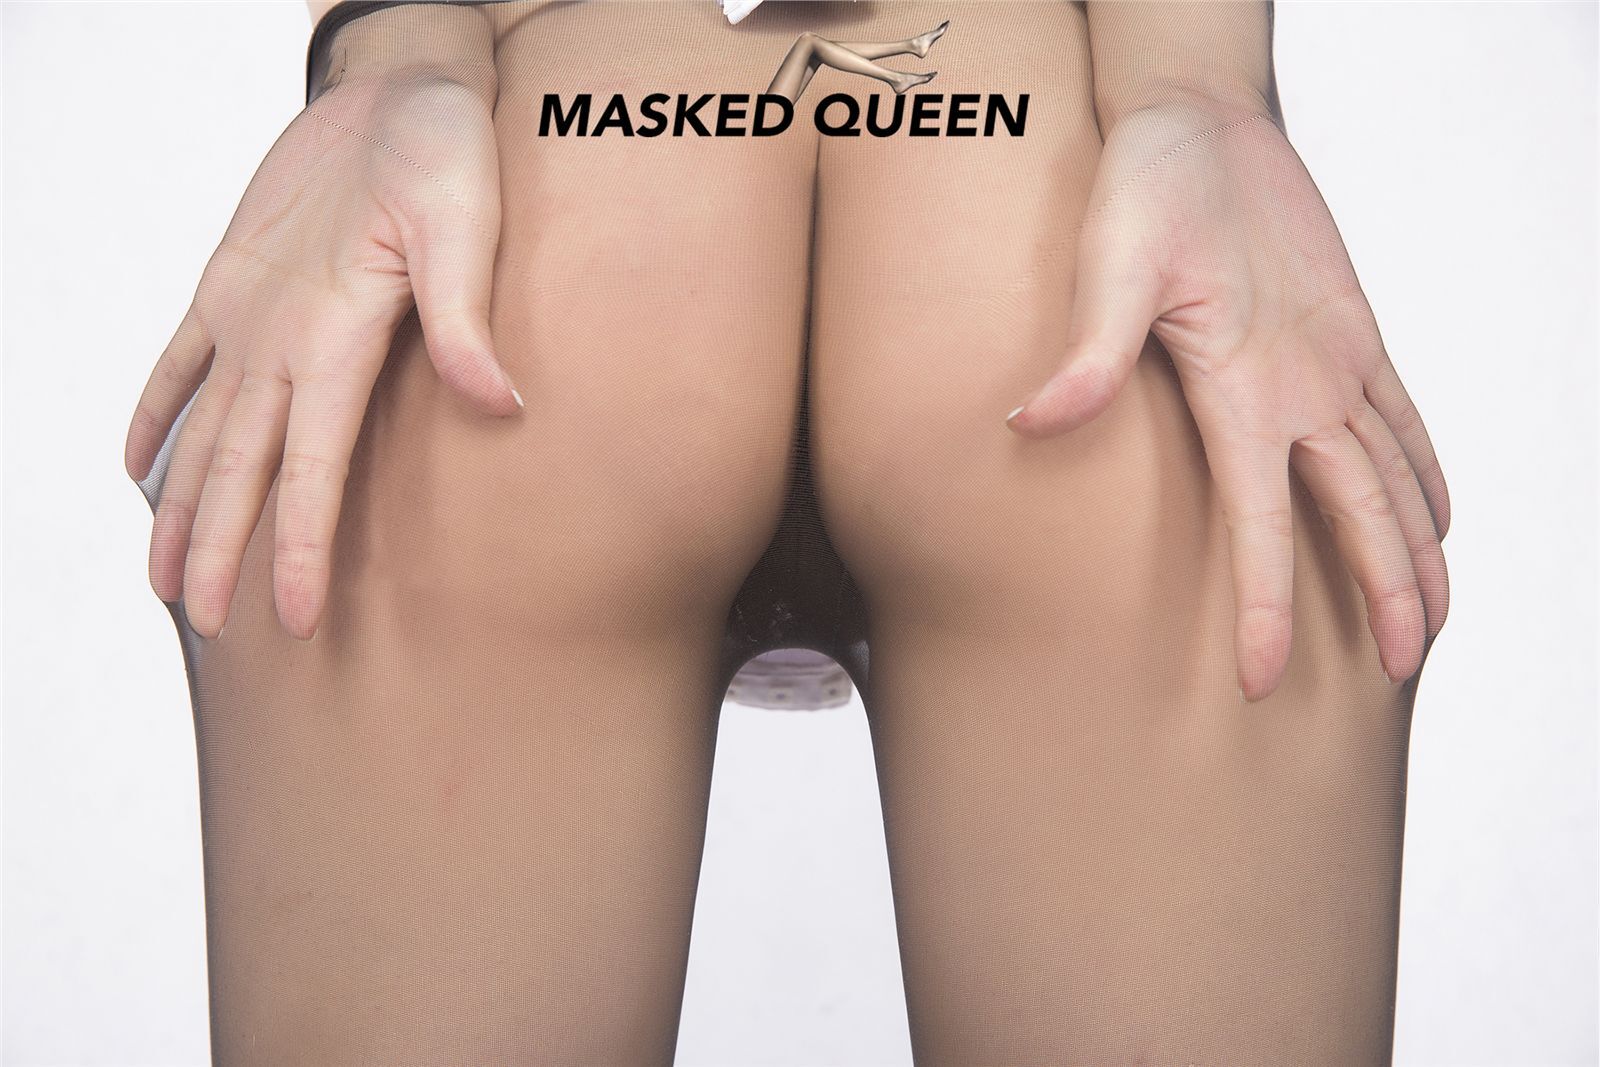 [Masked Queen] the temptation of No.005 one-piece lingerie